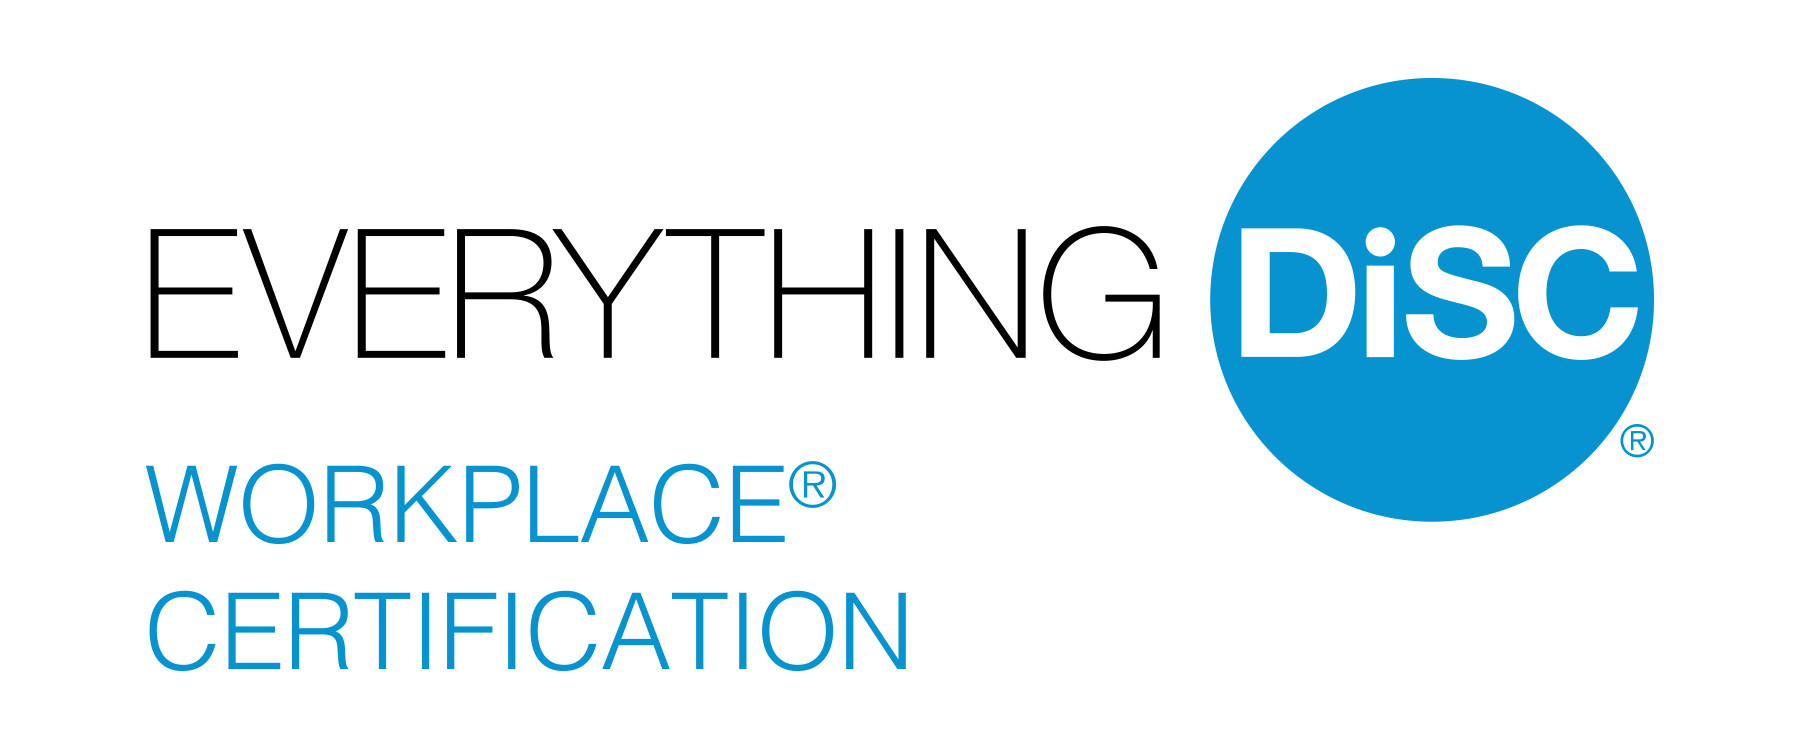 Certification in Everything DiSC logo